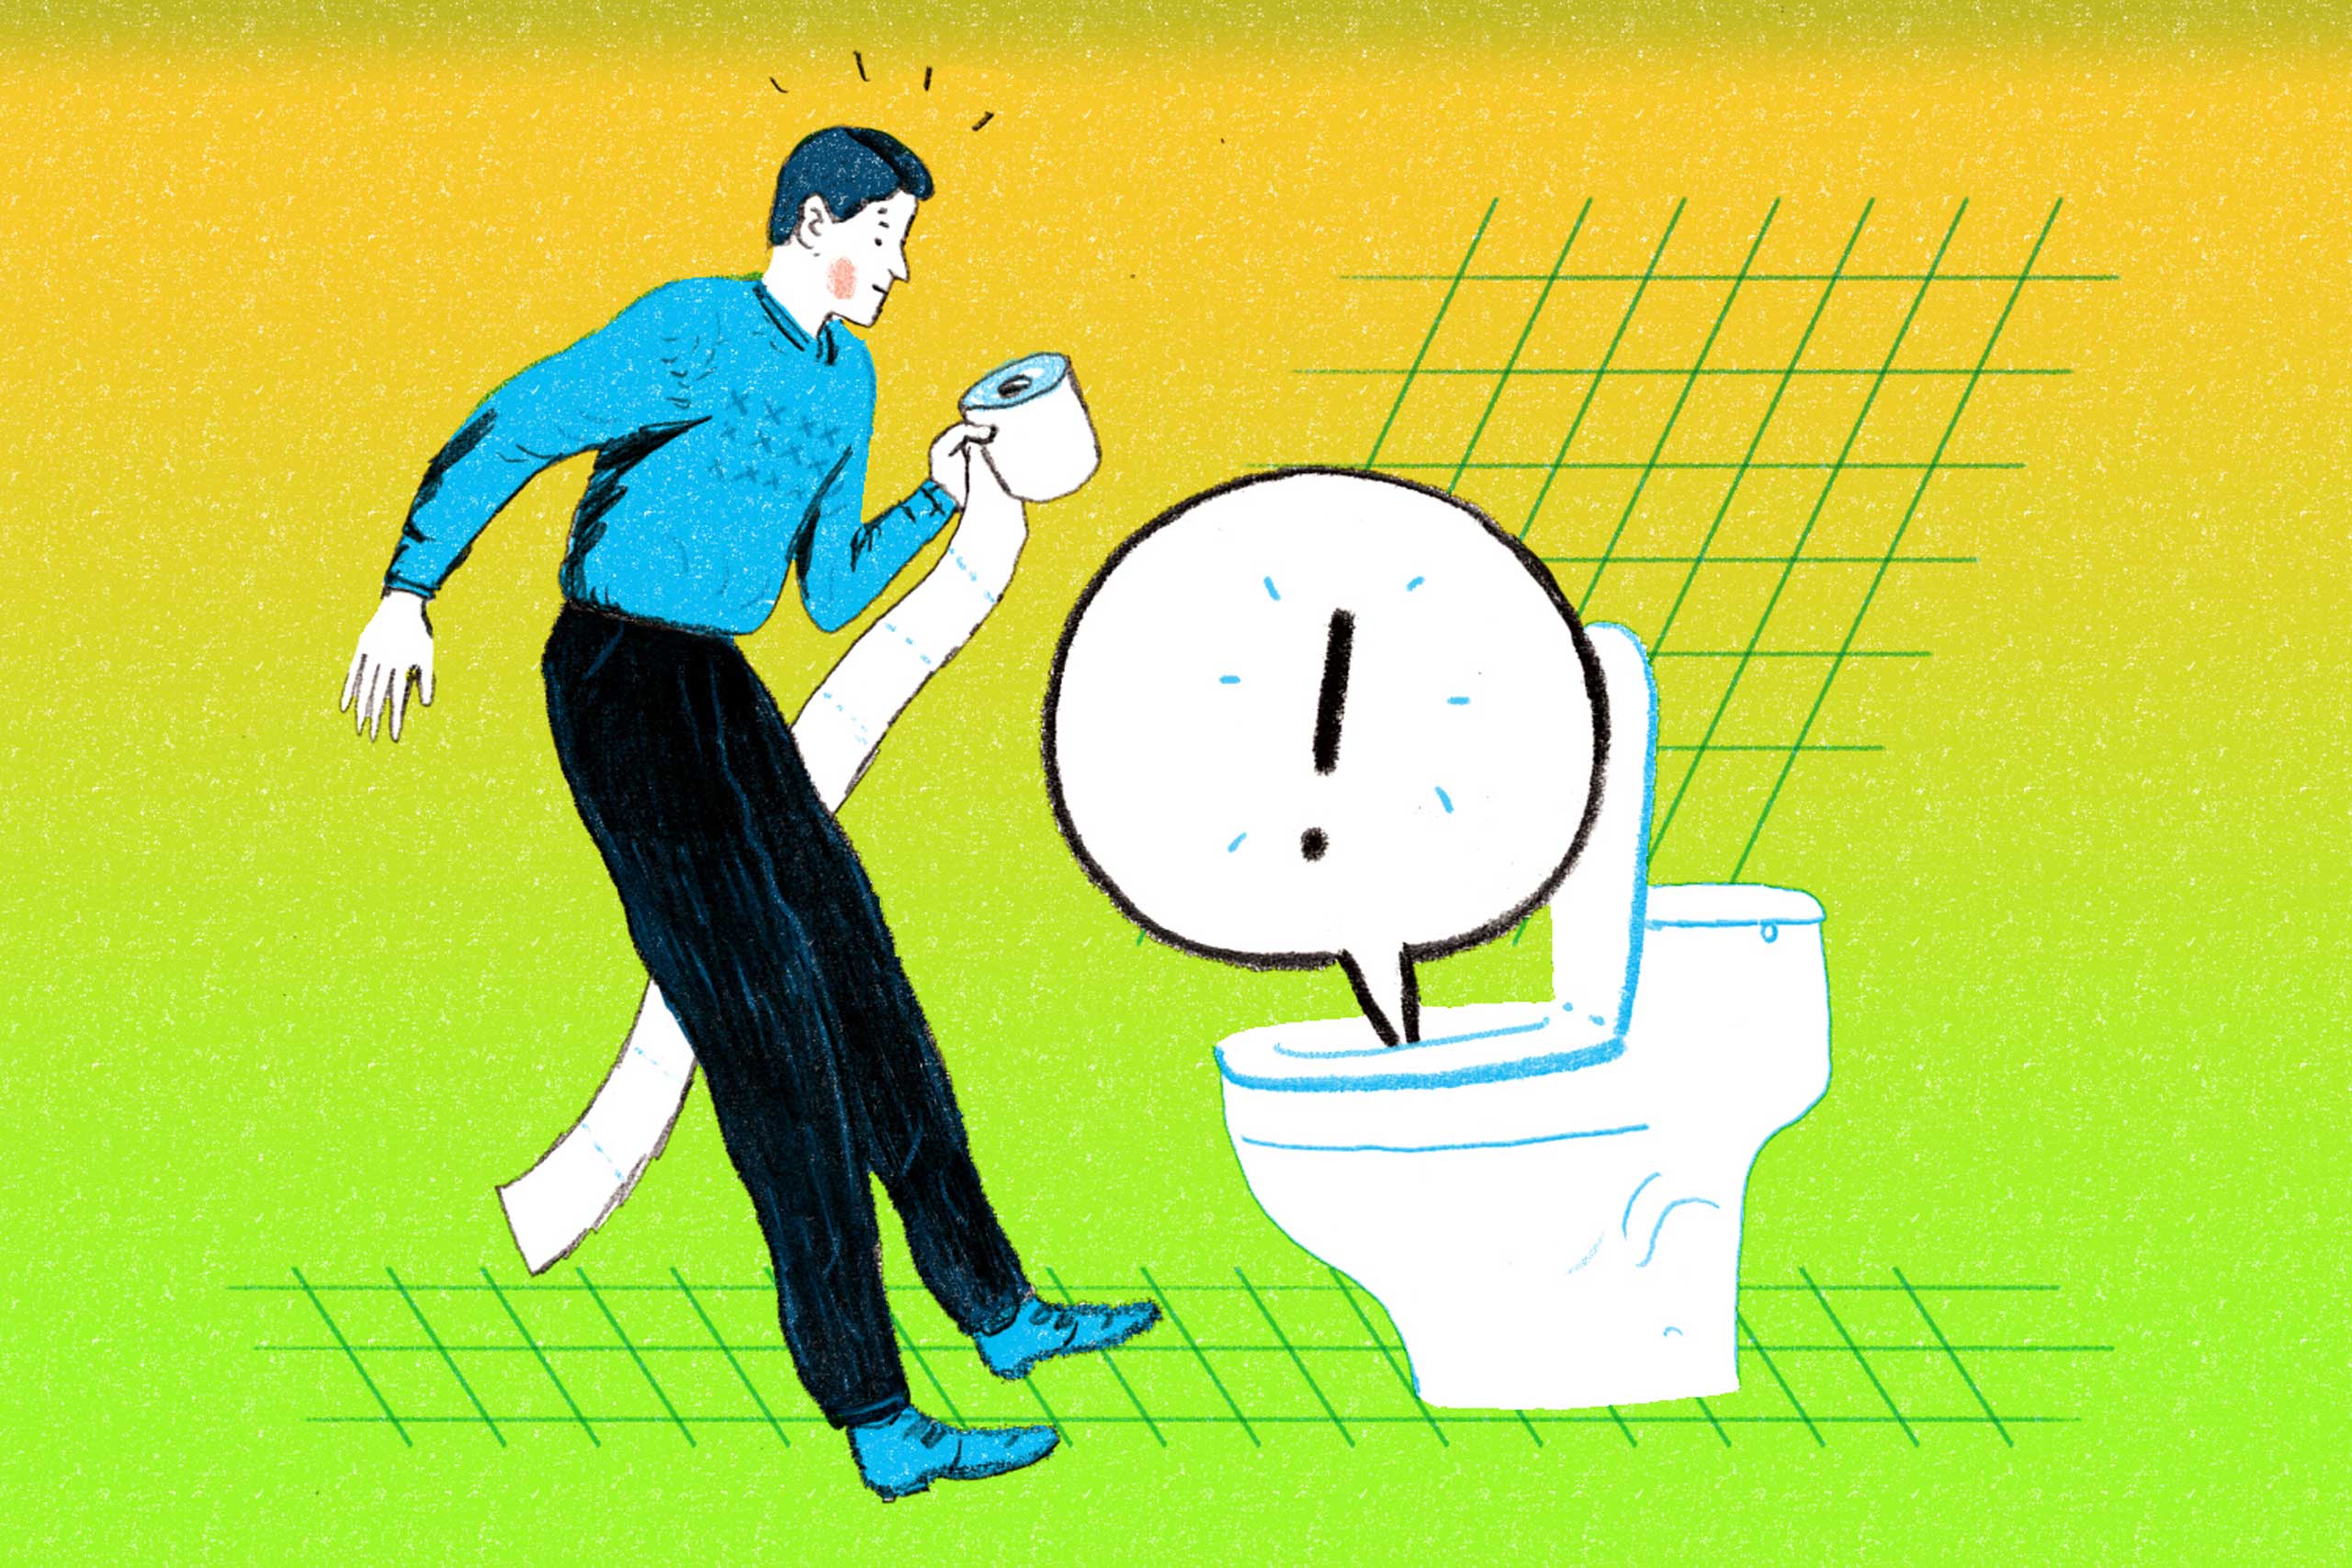 <strong><a href="http://time.com/3625206/poop-health/" target="_blank">You Asked: What Is My Poo Telling Me?</a></strong> If you listen hard enough, you'll hear all kinds of health stories from #2. (Illustration by Peter Oumanski for TIME)